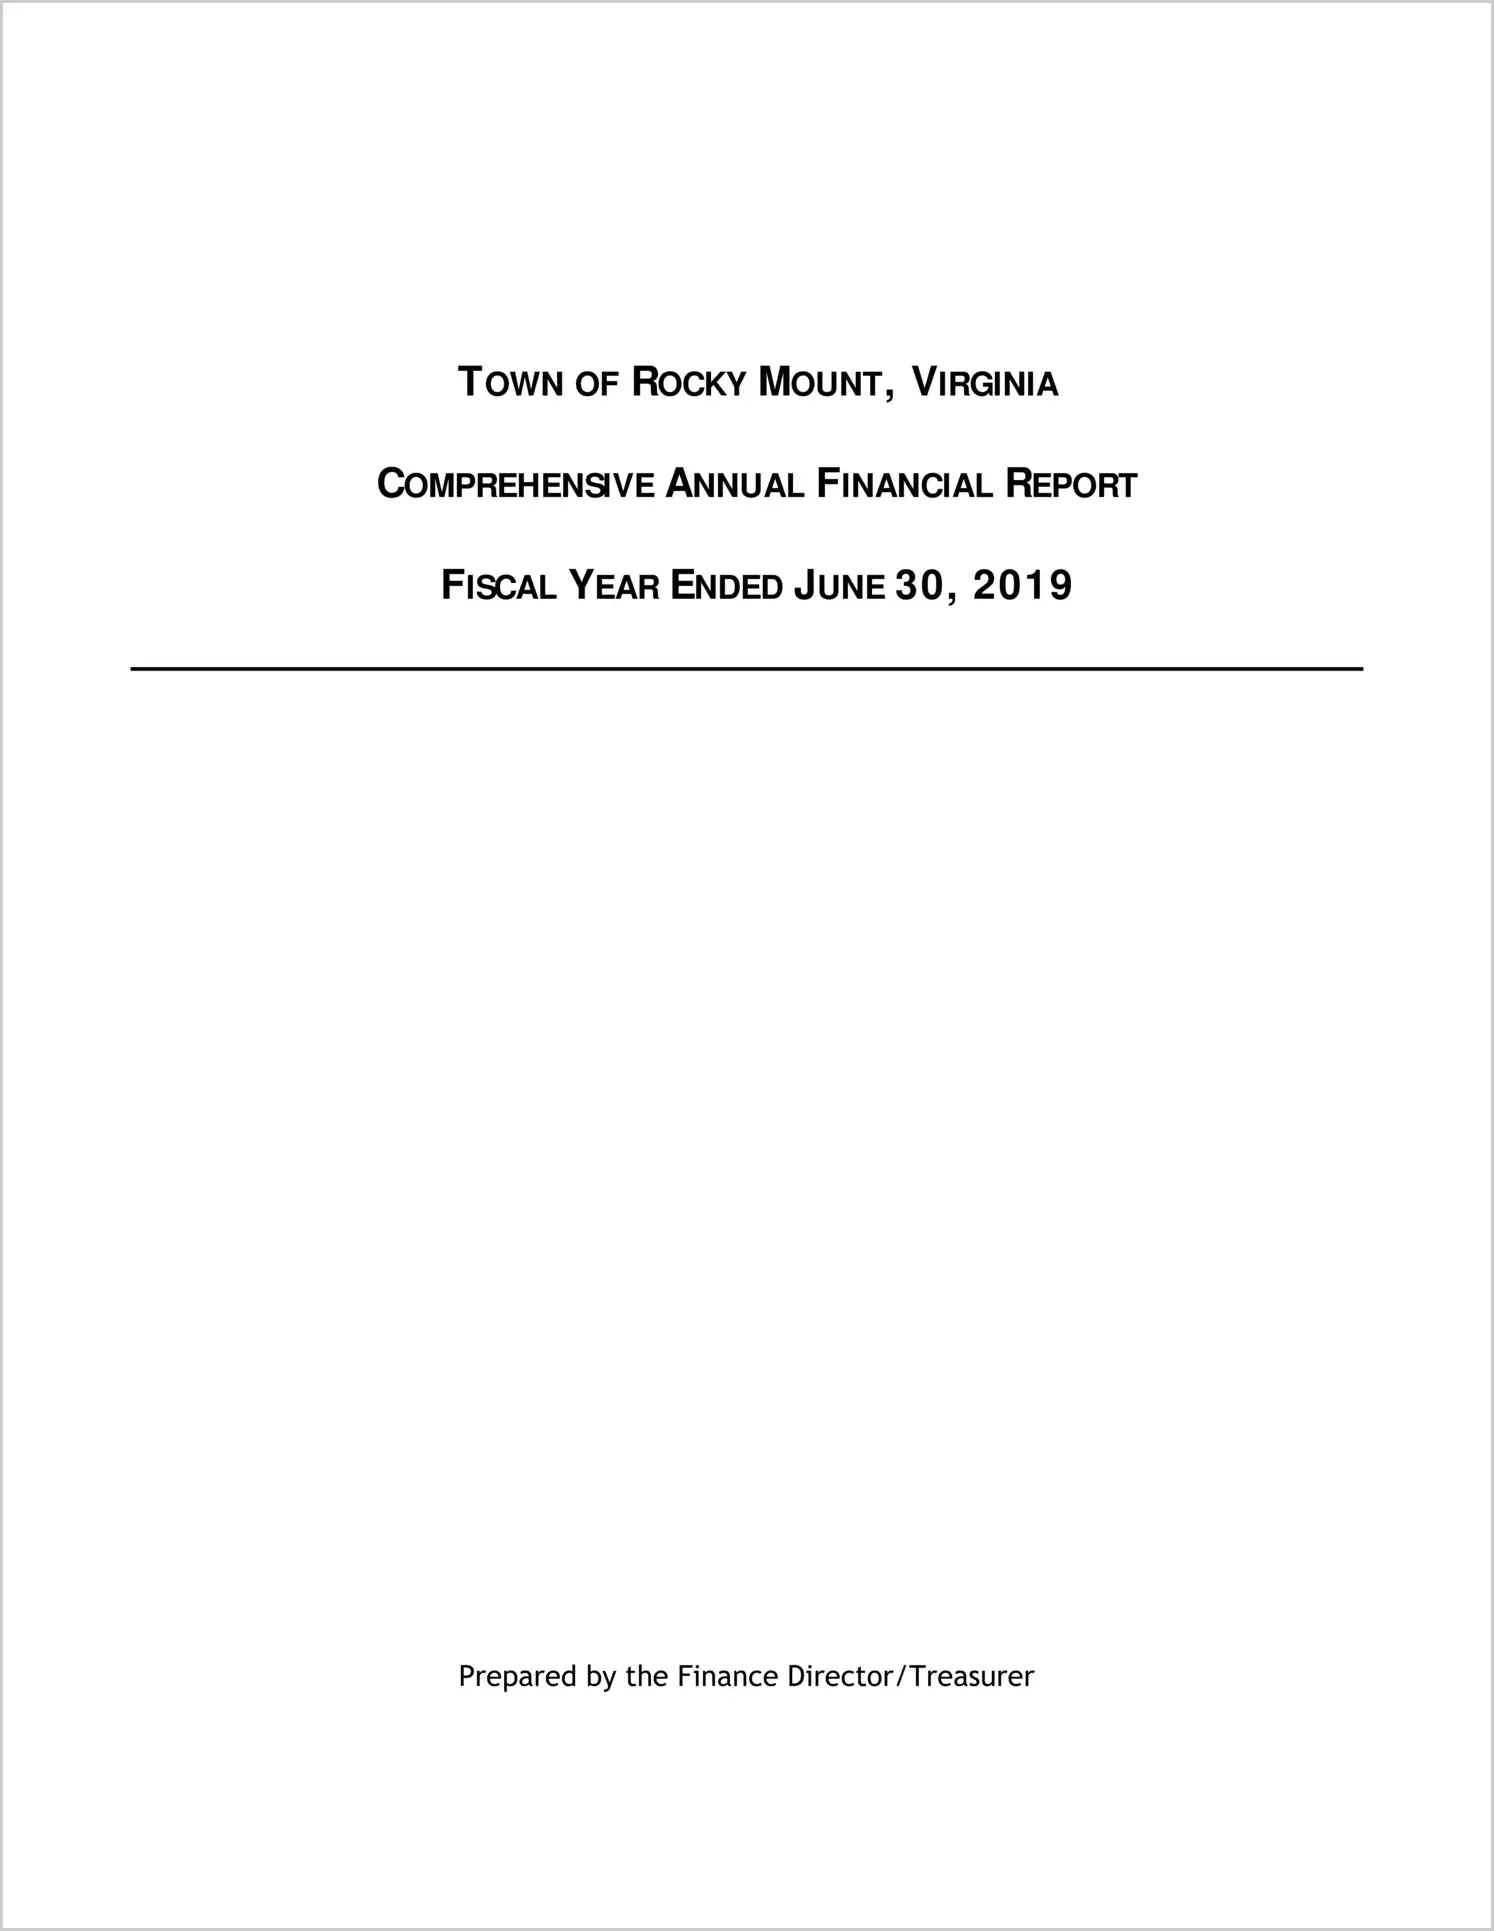 2019 Annual Financial Report for Town of Rocky Mount